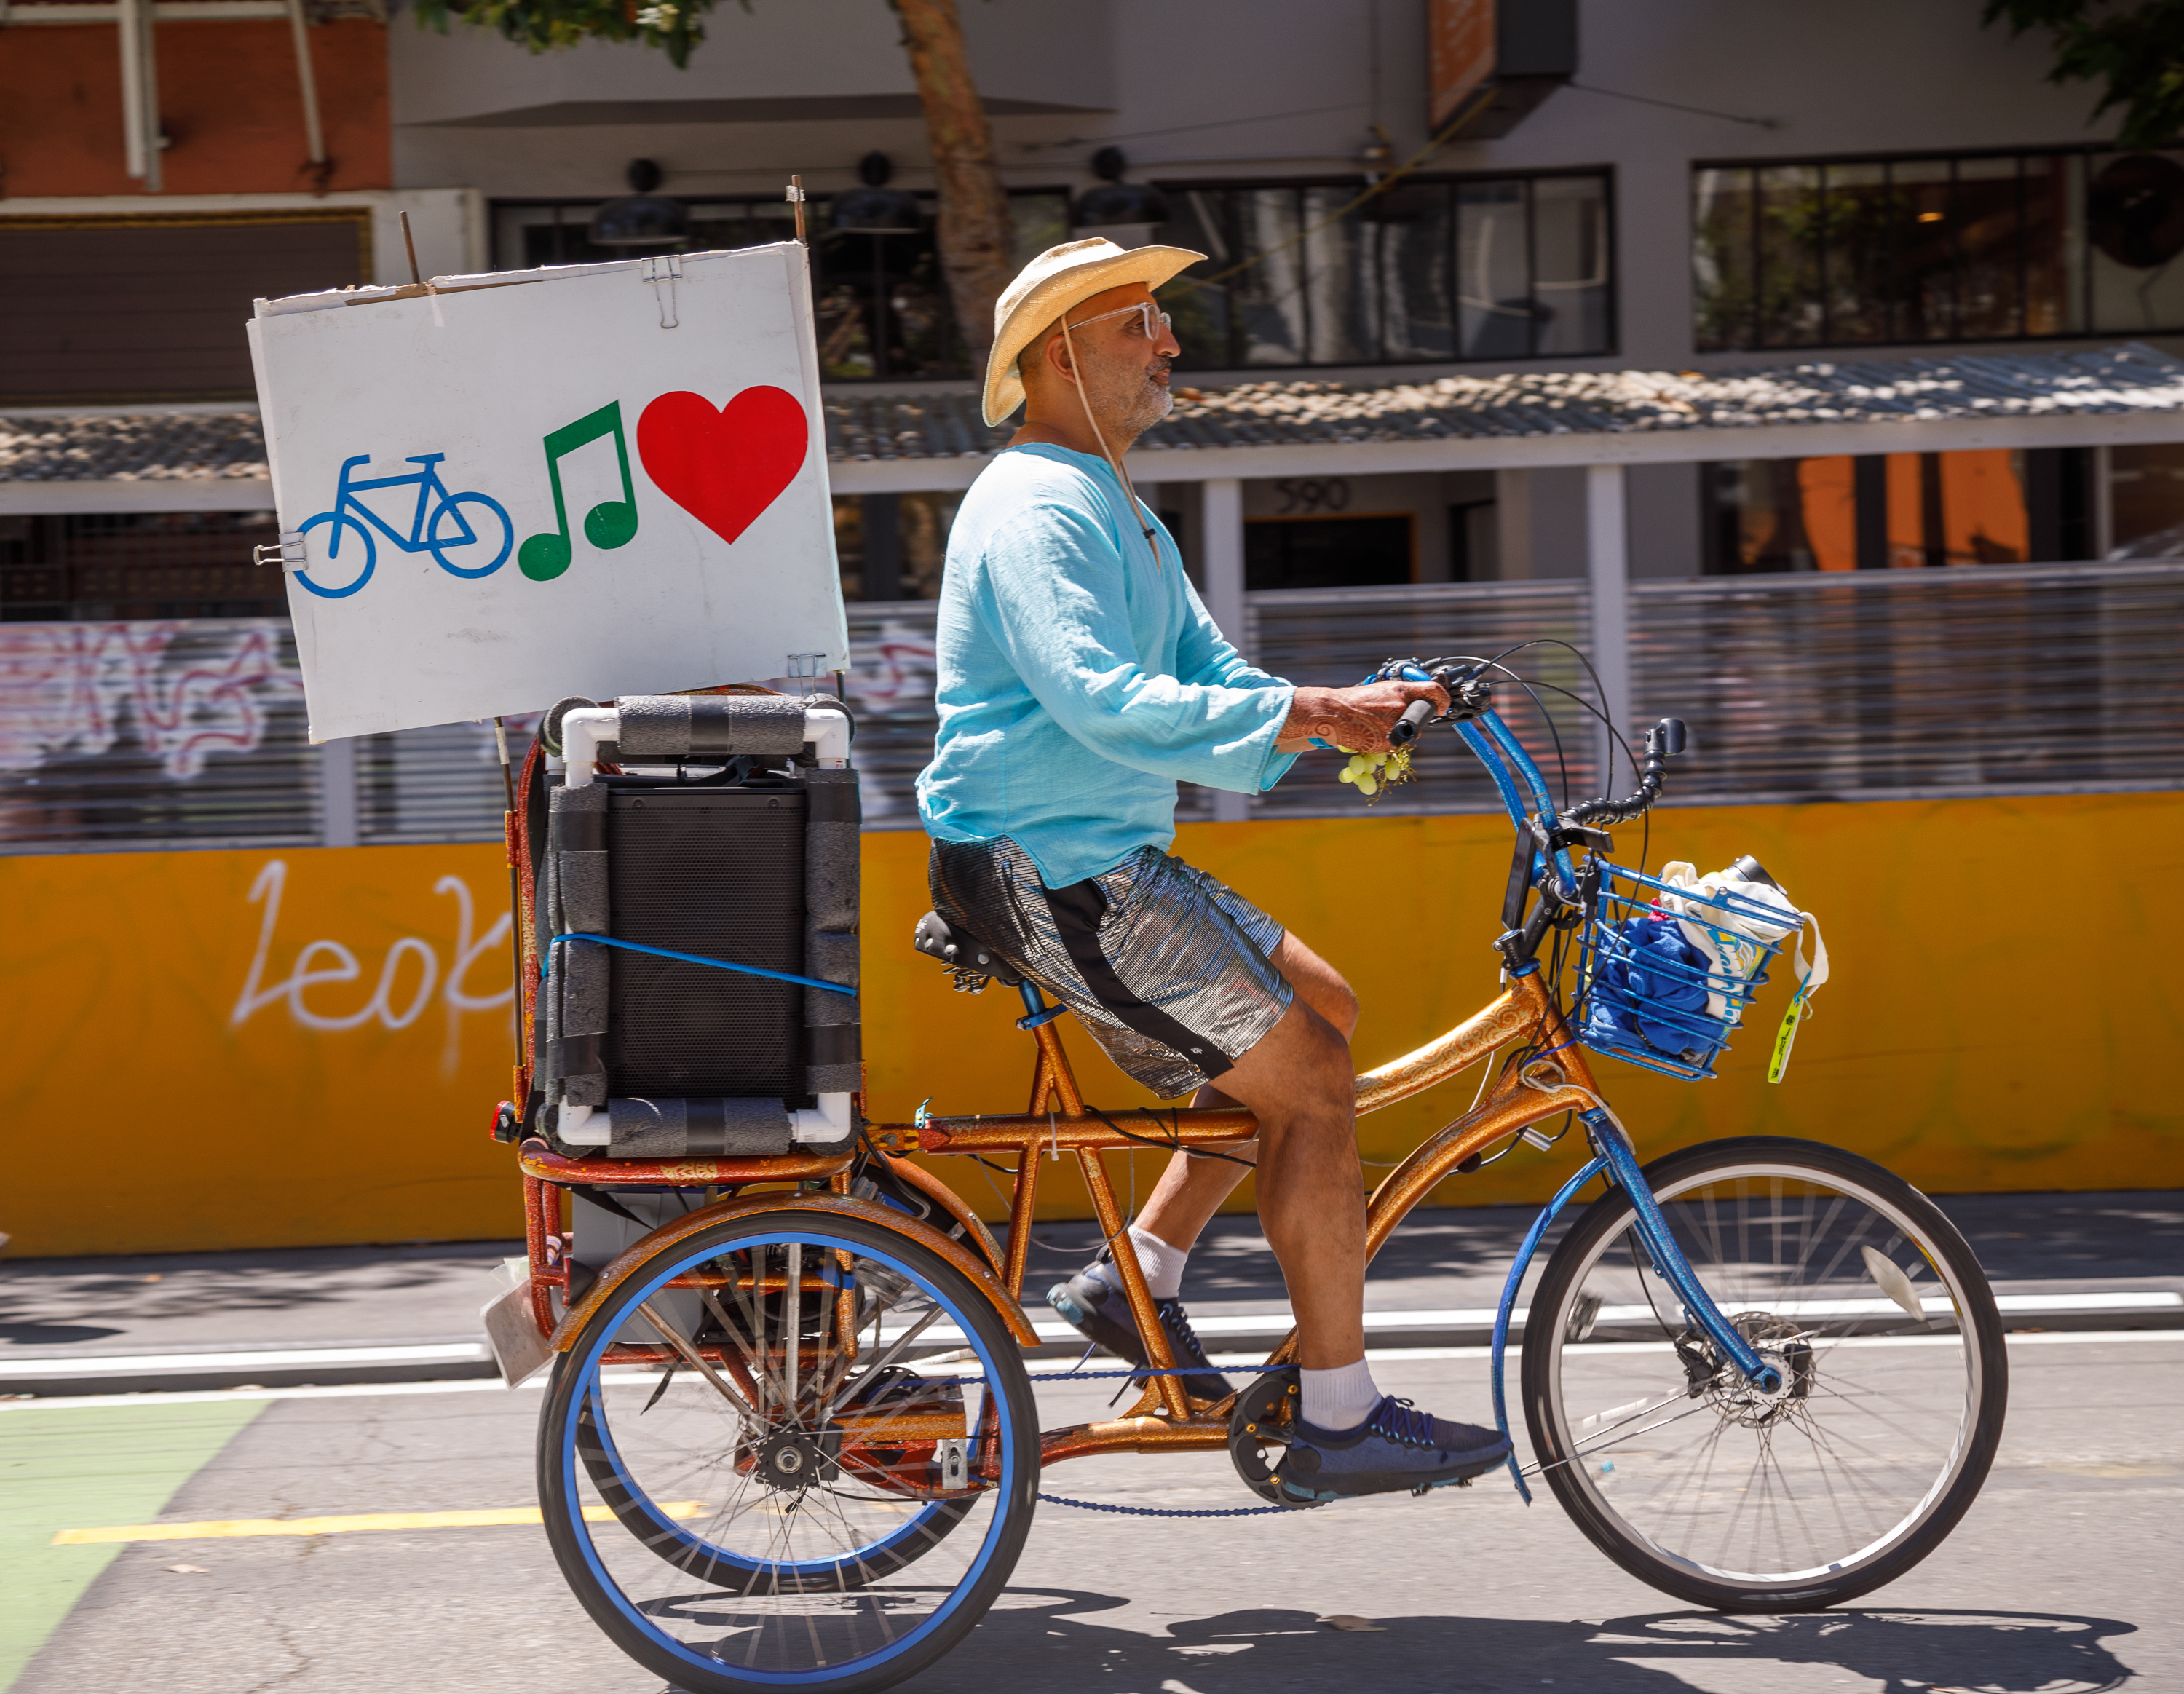 A man on a tricycle with a music speaker and a sign featuring a bike, musical note, and heart.